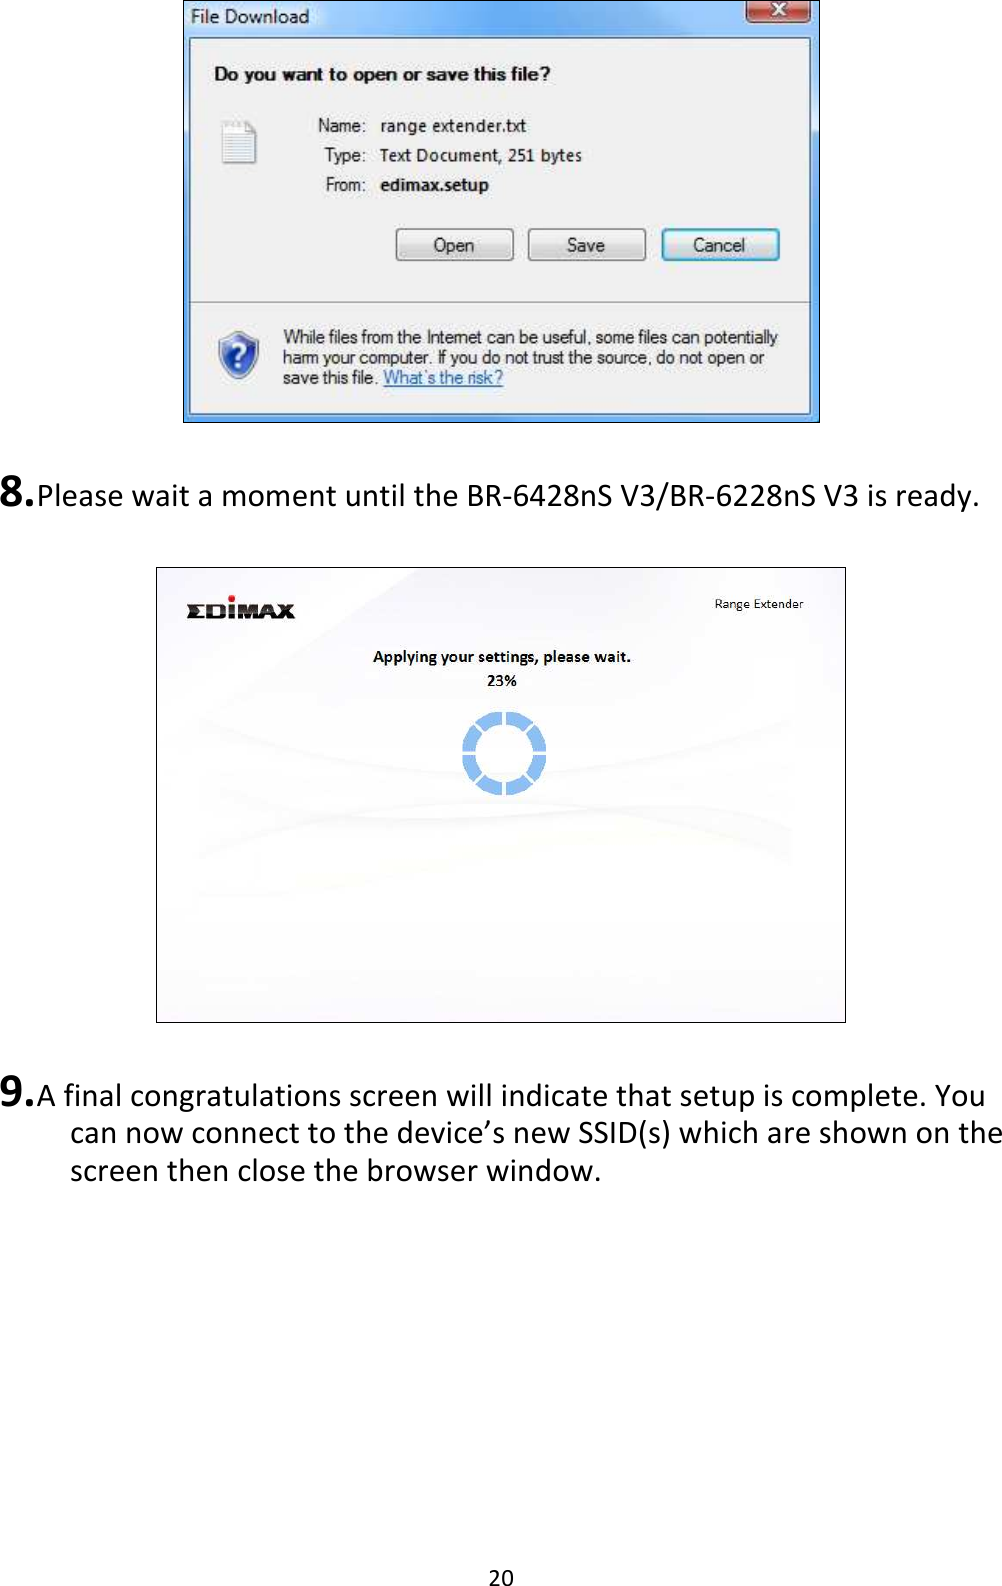 20   8. Please wait a moment until the BR-6428nS V3/BR-6228nS V3 is ready.    9. A final congratulations screen will indicate that setup is complete. You     can now connect to the device’s new SSID(s) which are shown on the     screen then close the browser window.          